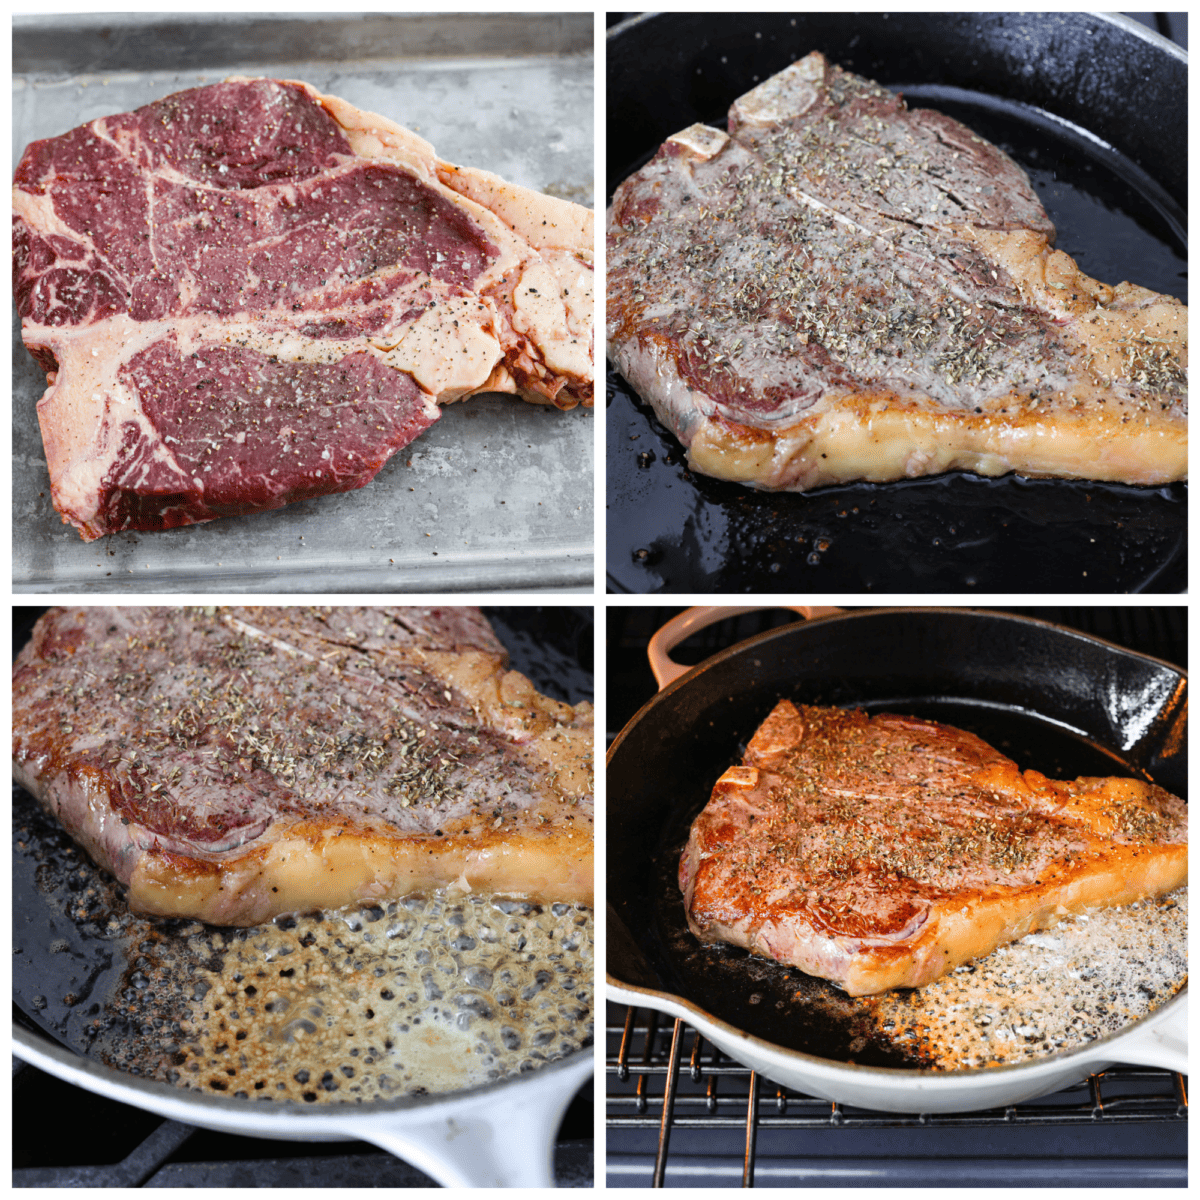 4-photo collage of the steak being seasoned and cooked.